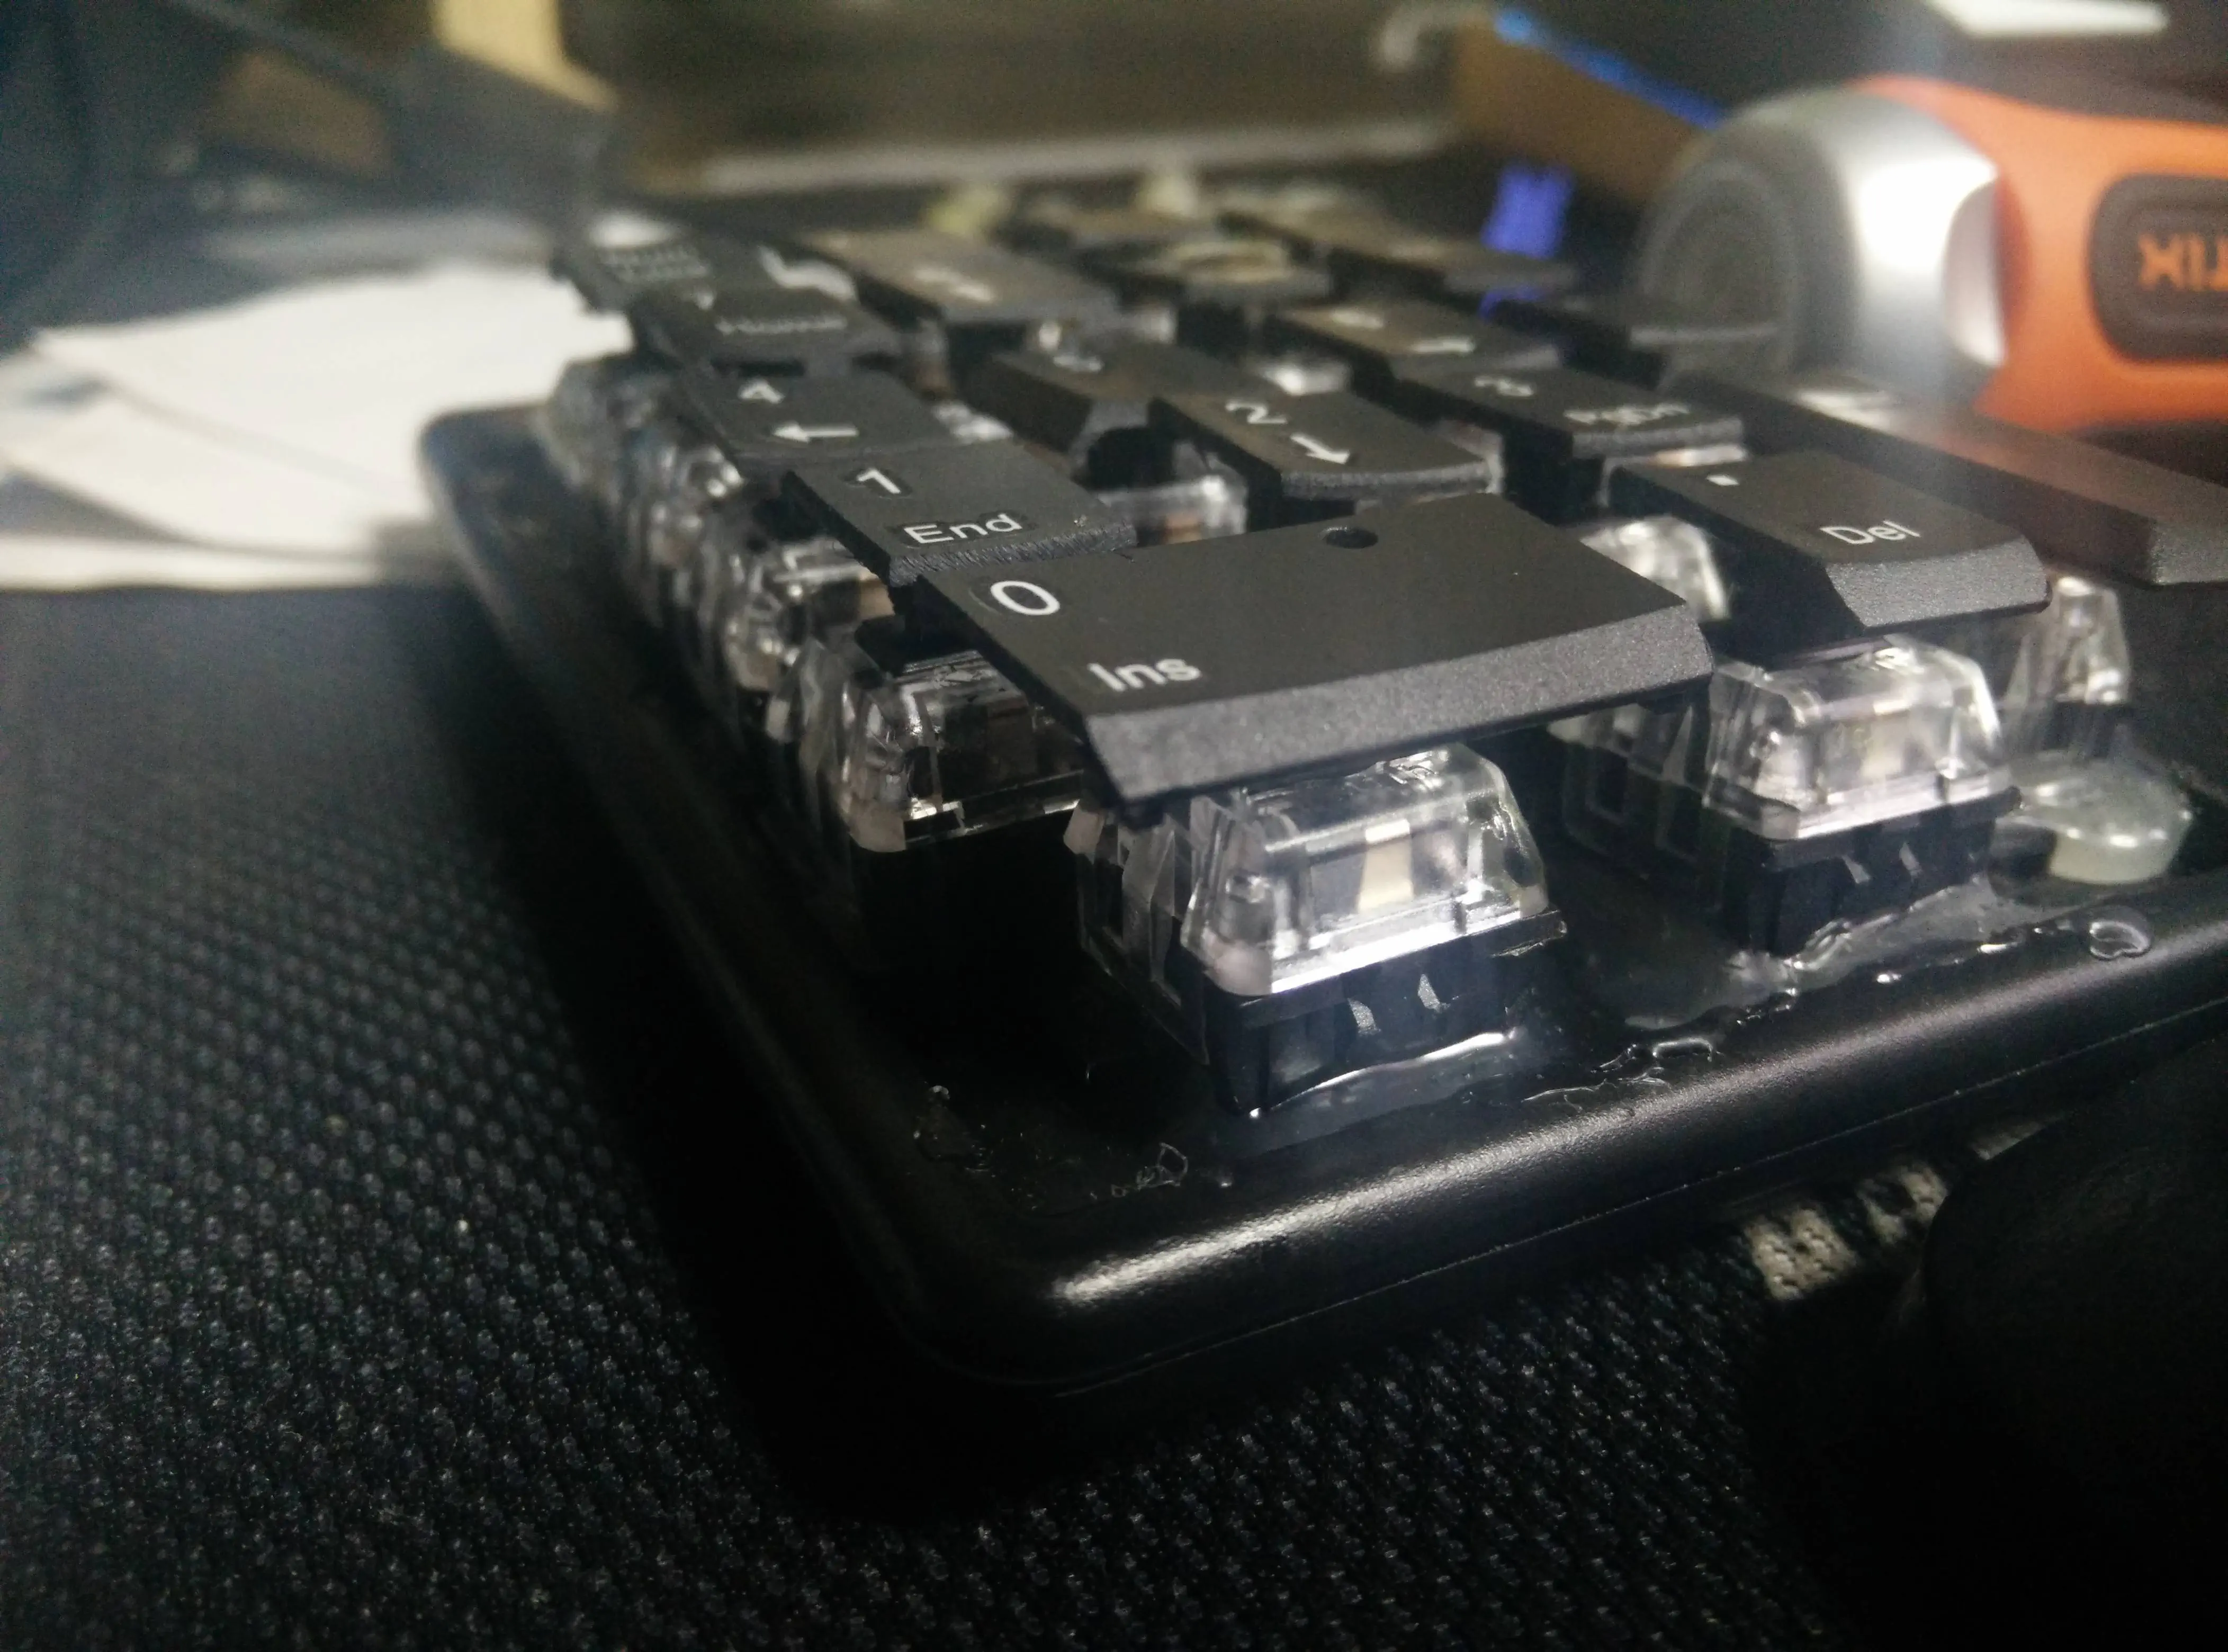 Photo of a badly-modified number pad keyboard, whose rubber membrane domes were swapped out for mechanical switches.